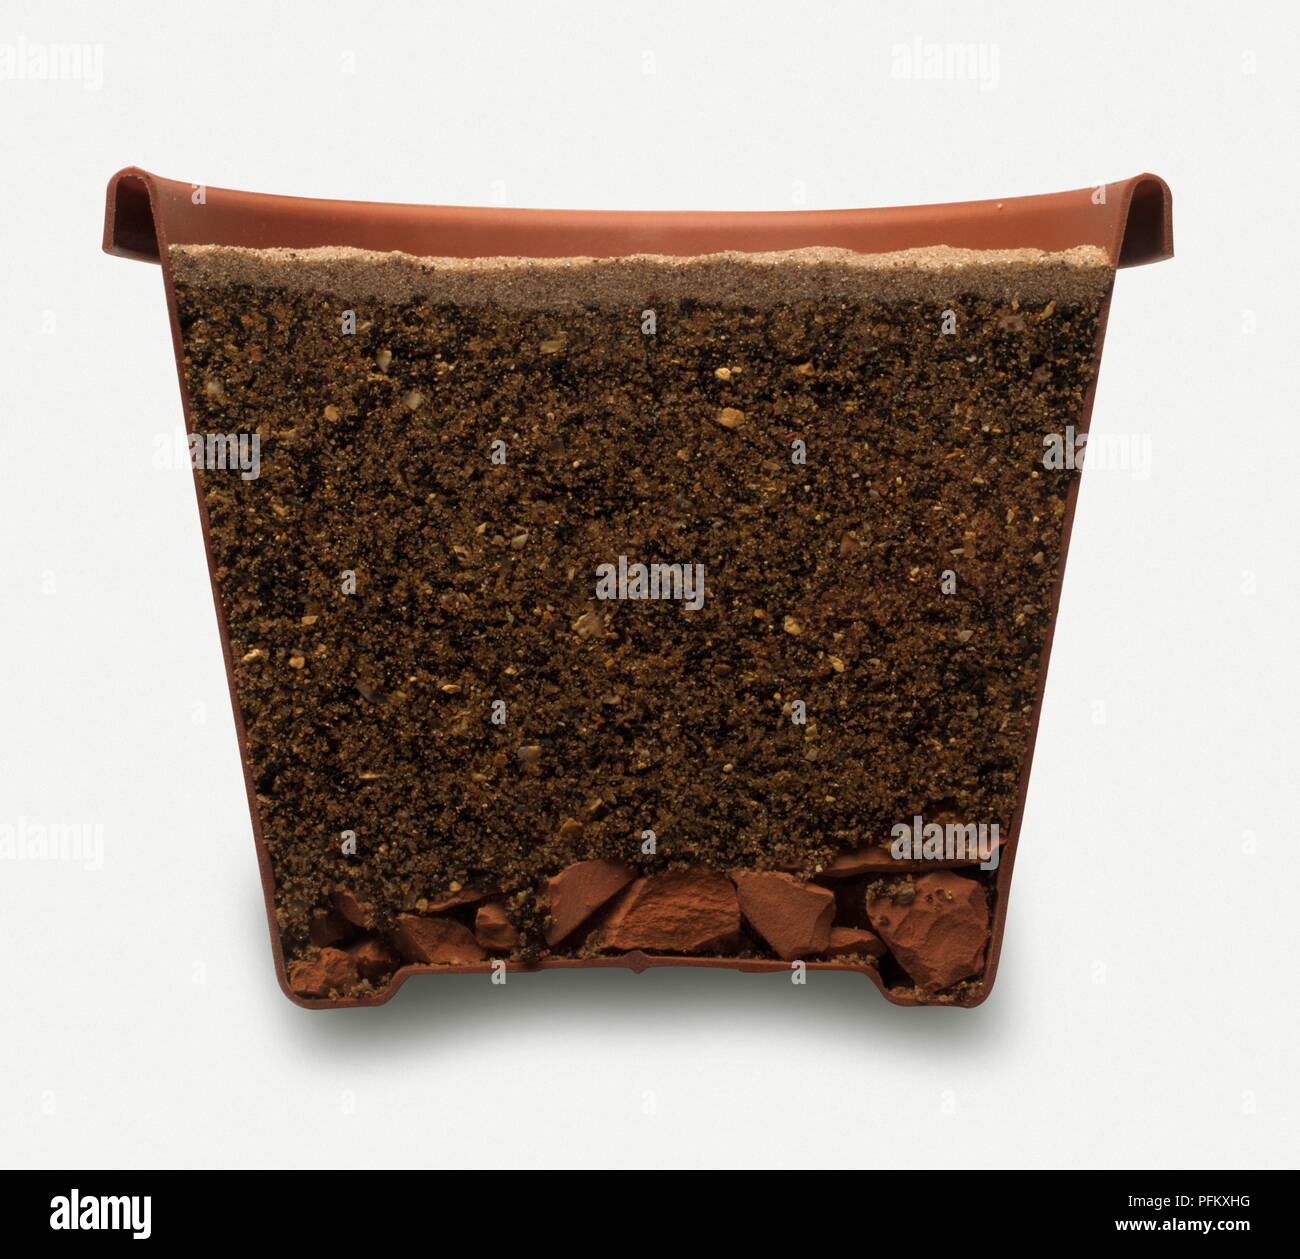 Cross section of plant pot showing seeds in silver sand above seed compost and drainage layers of broken clay pot at bottom Stock Photo